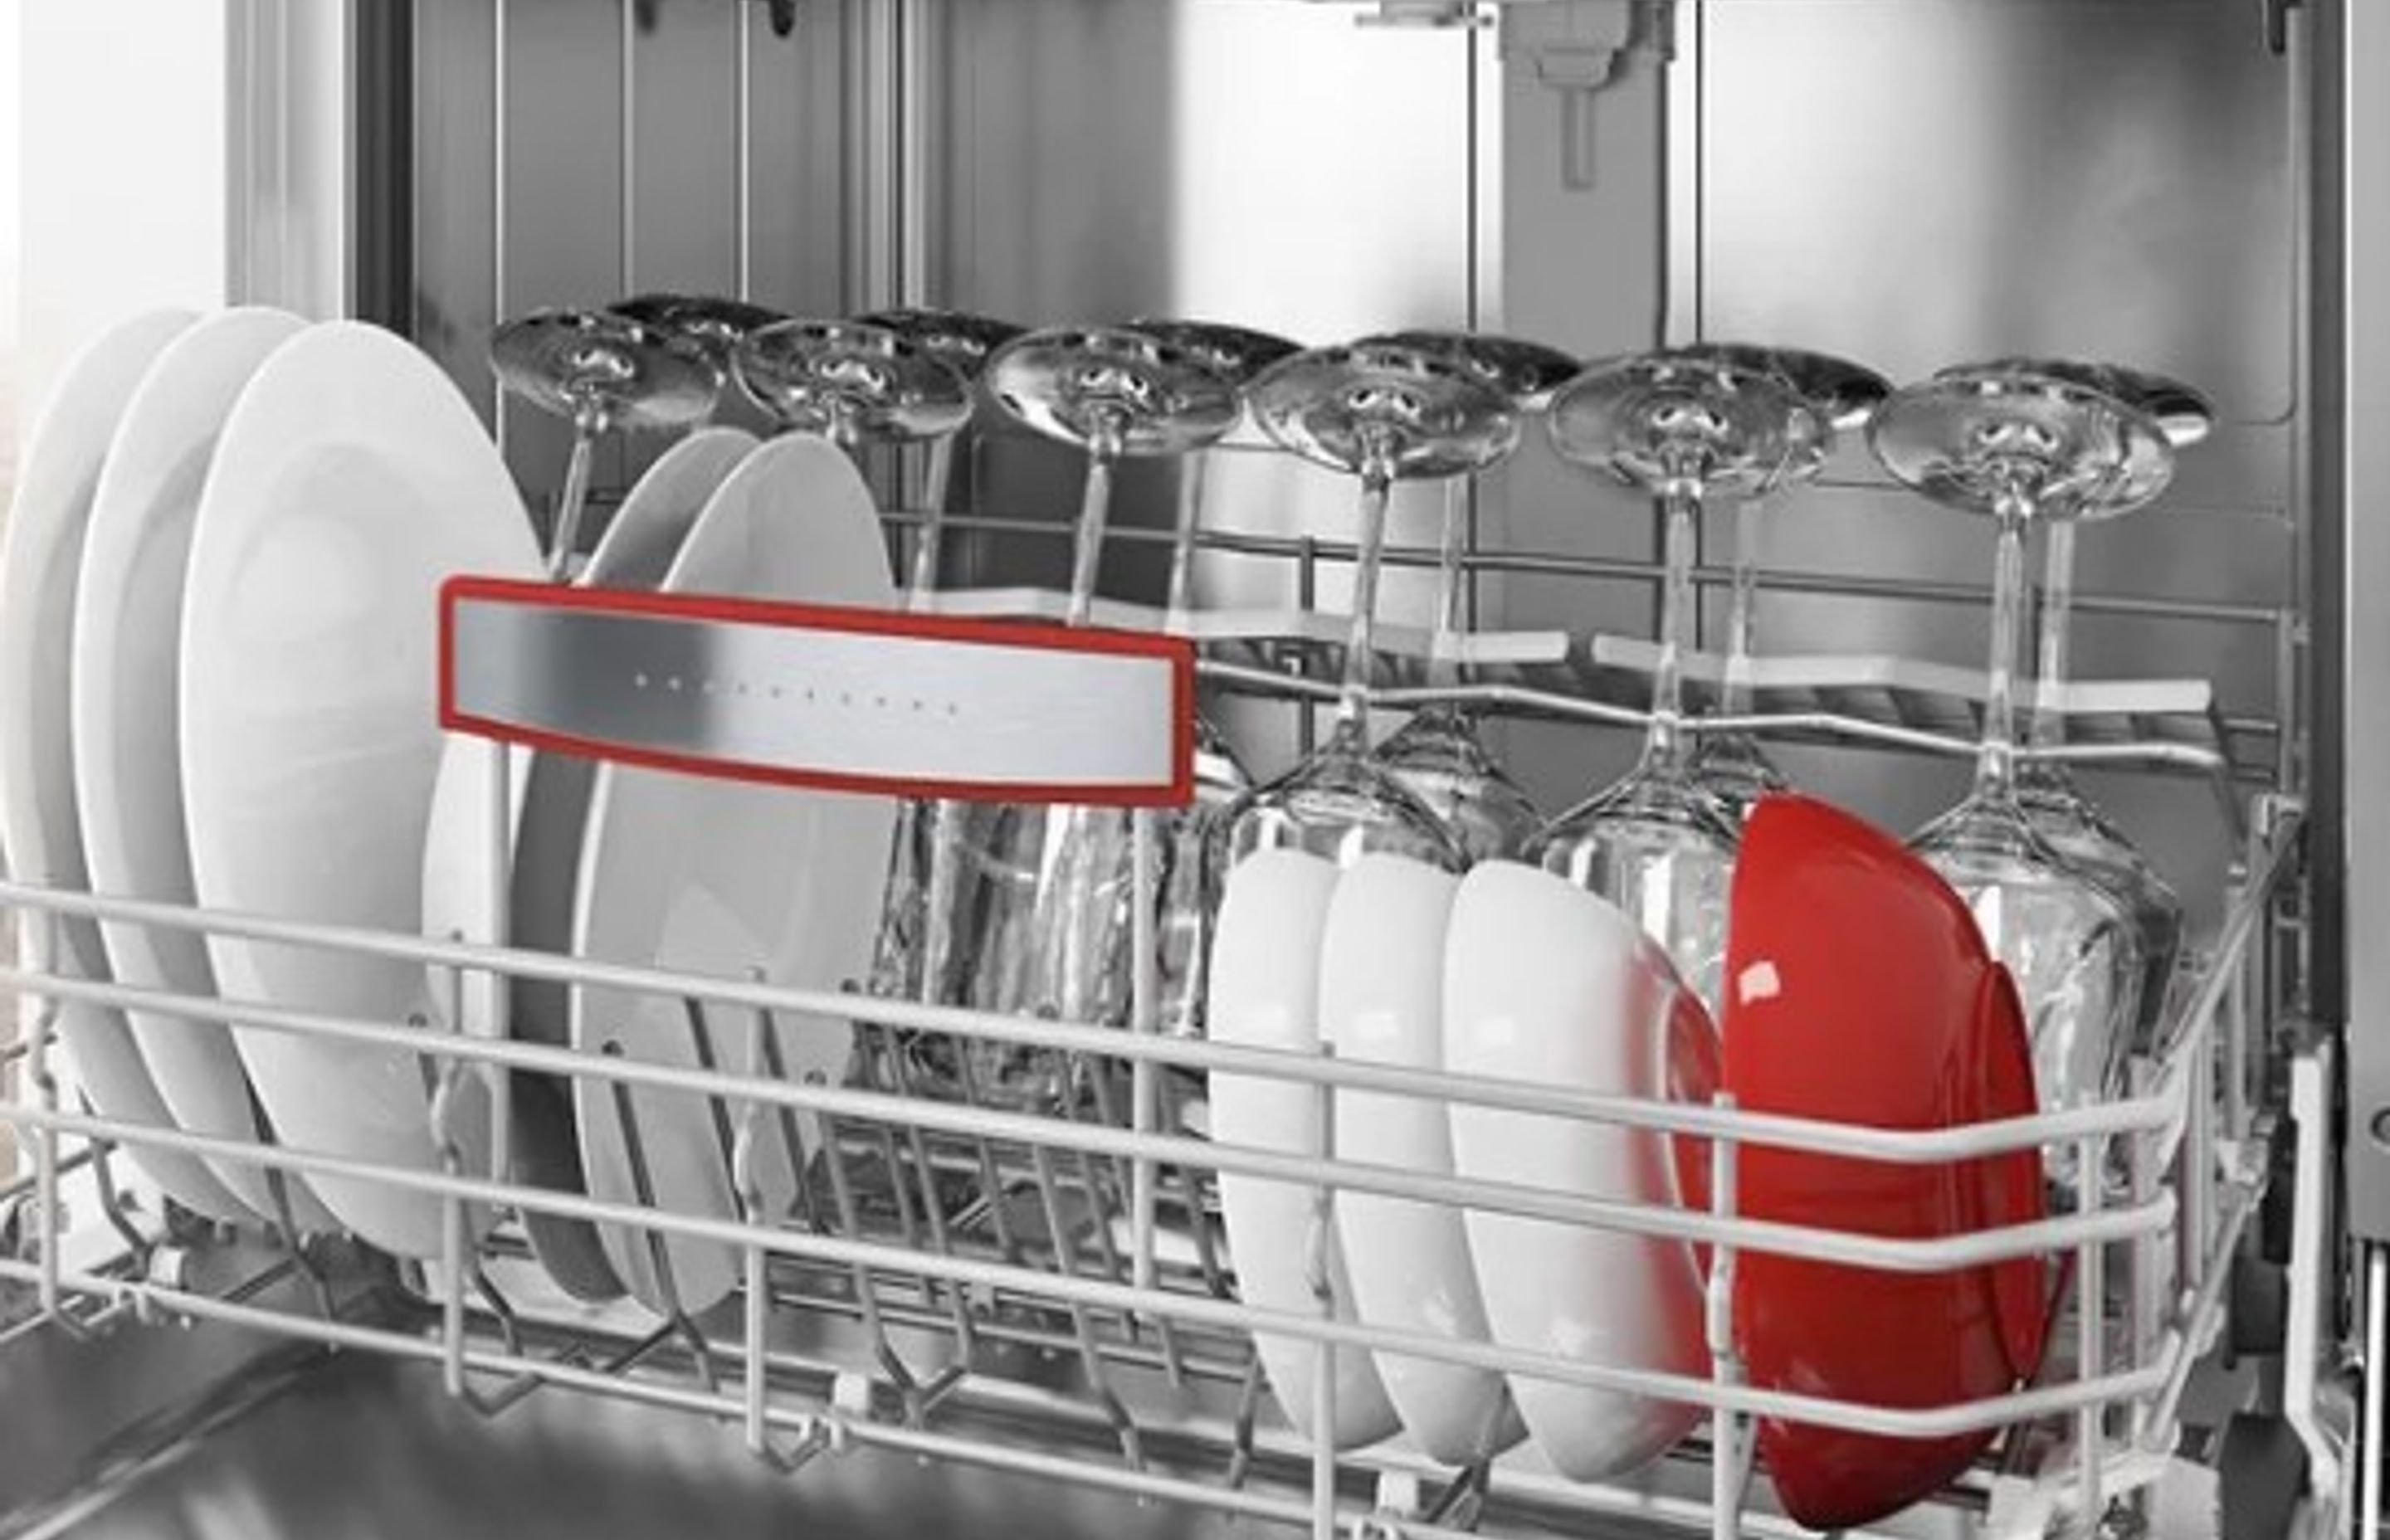 8 Tips To Help Your Dishwasher Run Better